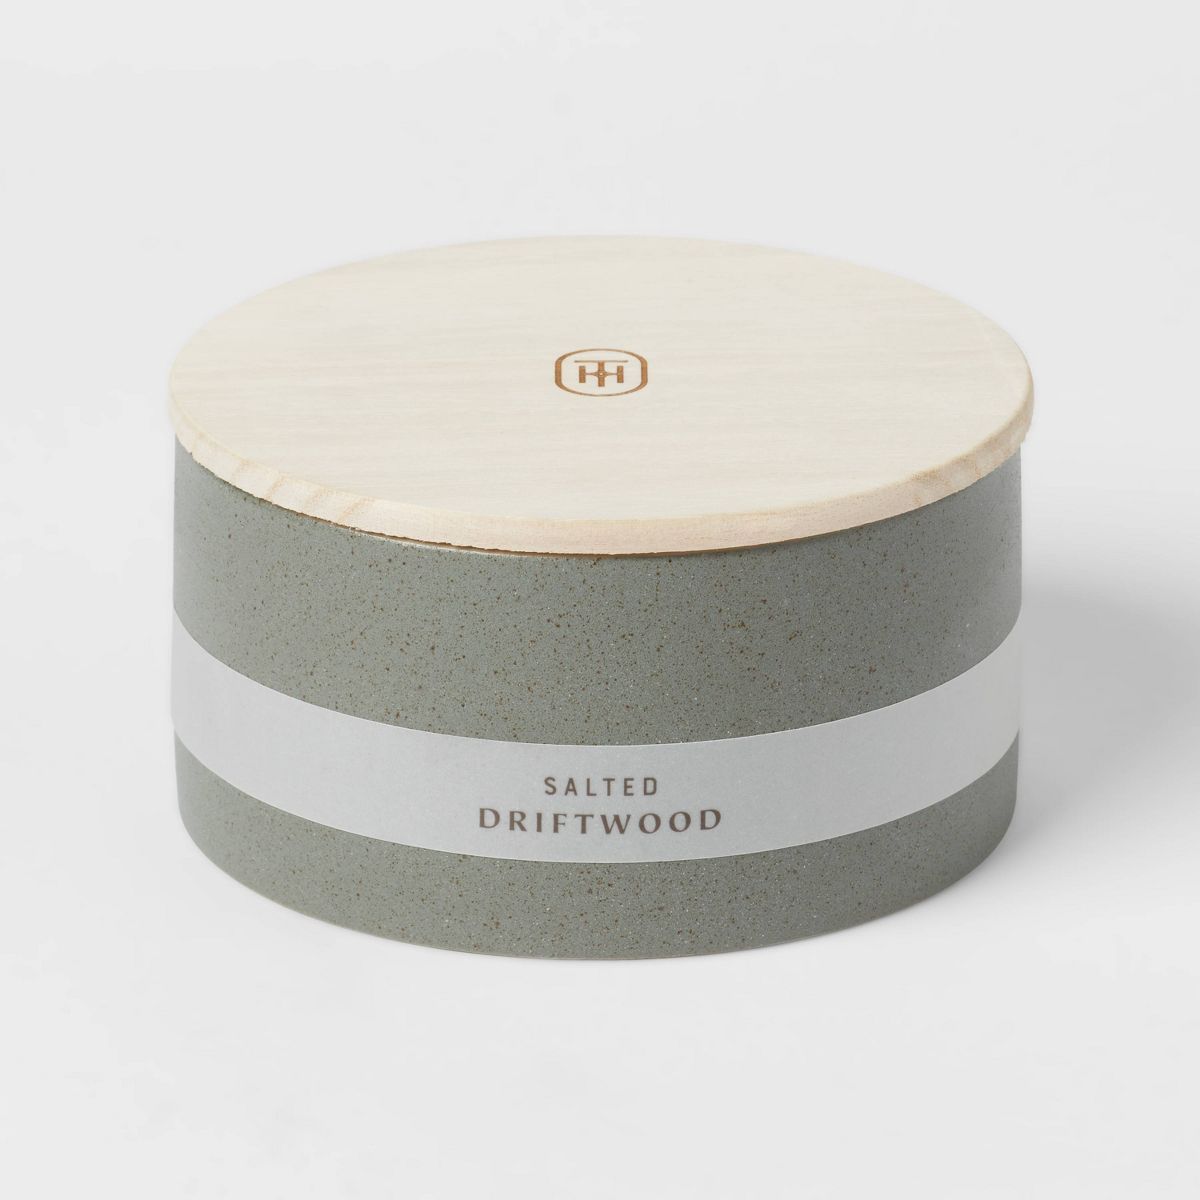 3-Wick 14oz Matte Textured Ceramic Wooden Wick Candle Gray/Salted Driftwood - Threshold™ | Target